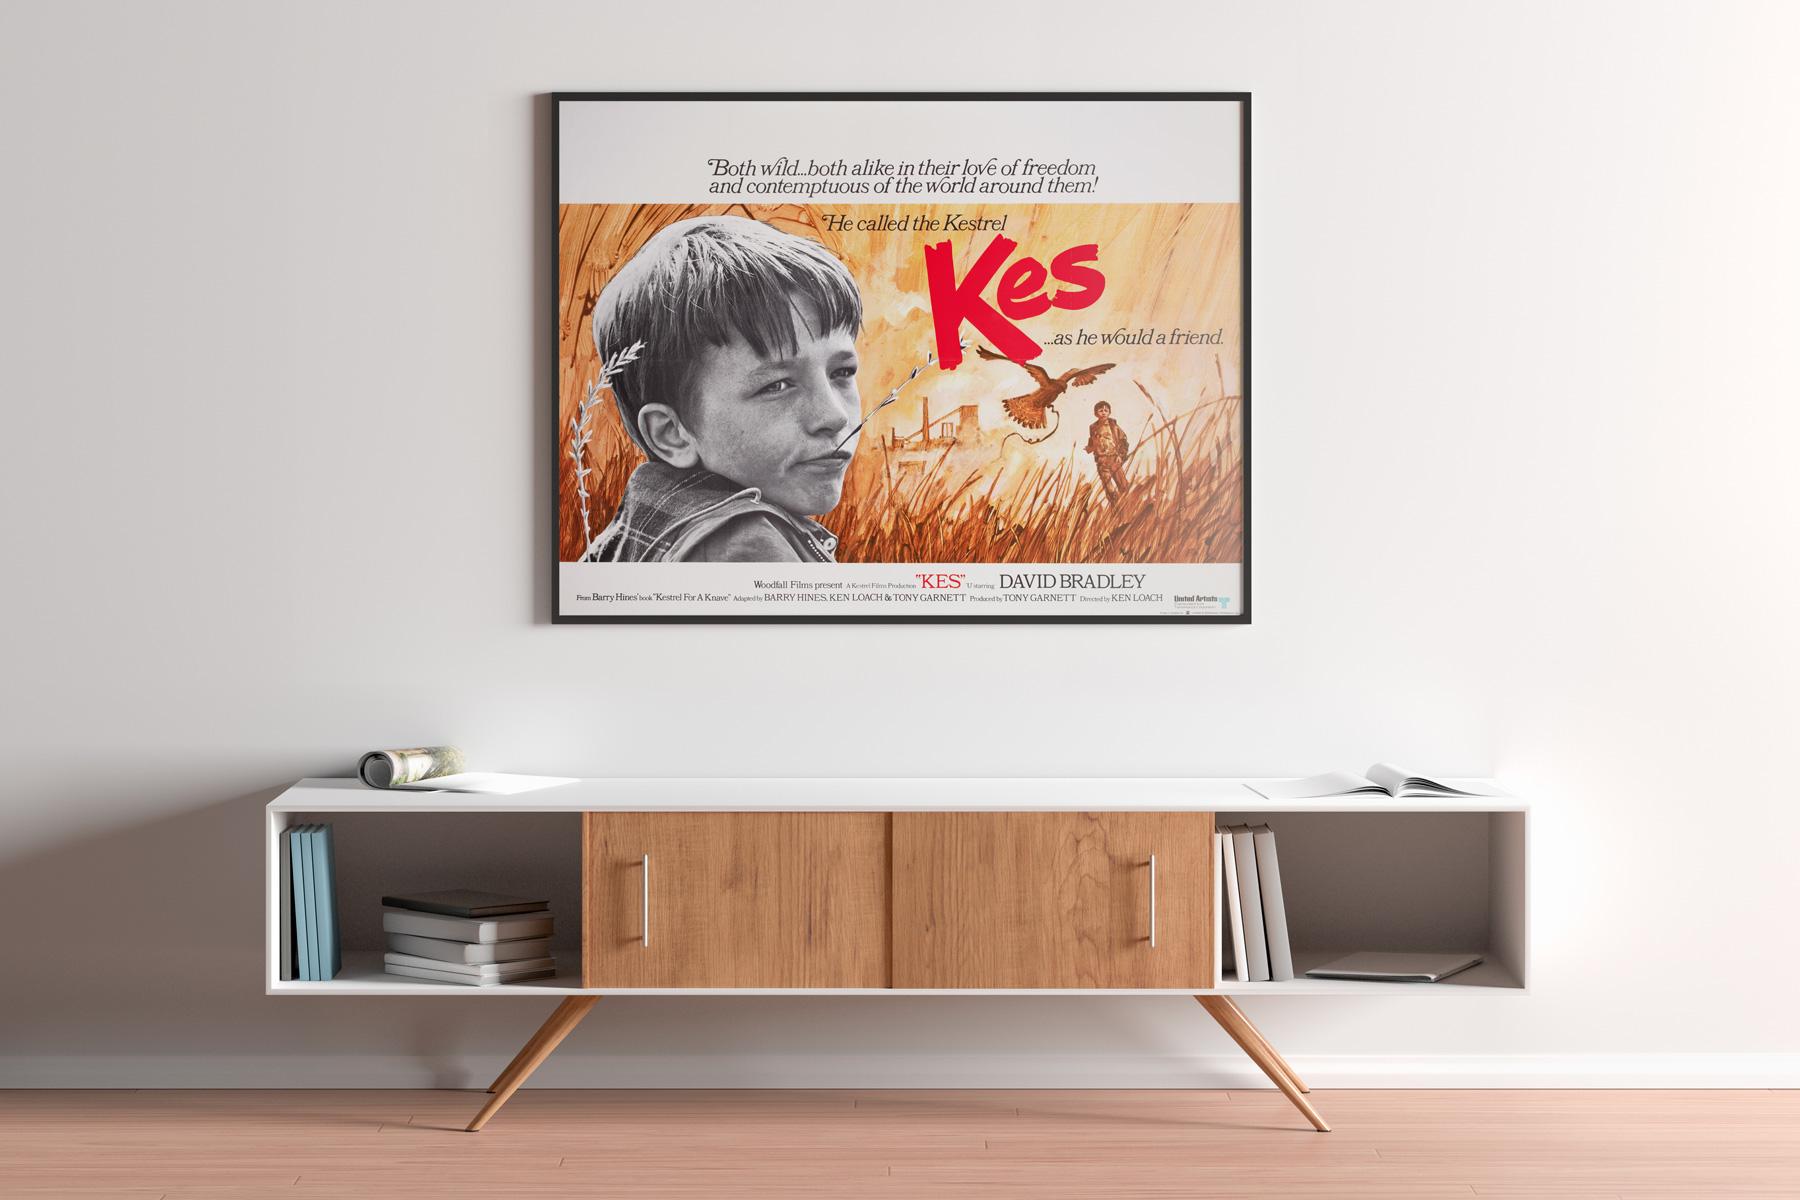 Country-of-origin UK quad for Ken Loach's gem of British working-class cinema, Kes. Suitably simple but powerful design for this kitchen sink classic.

This vintage movie poster is sized 30 x 40 inches, it will be sent rolled (unframed).